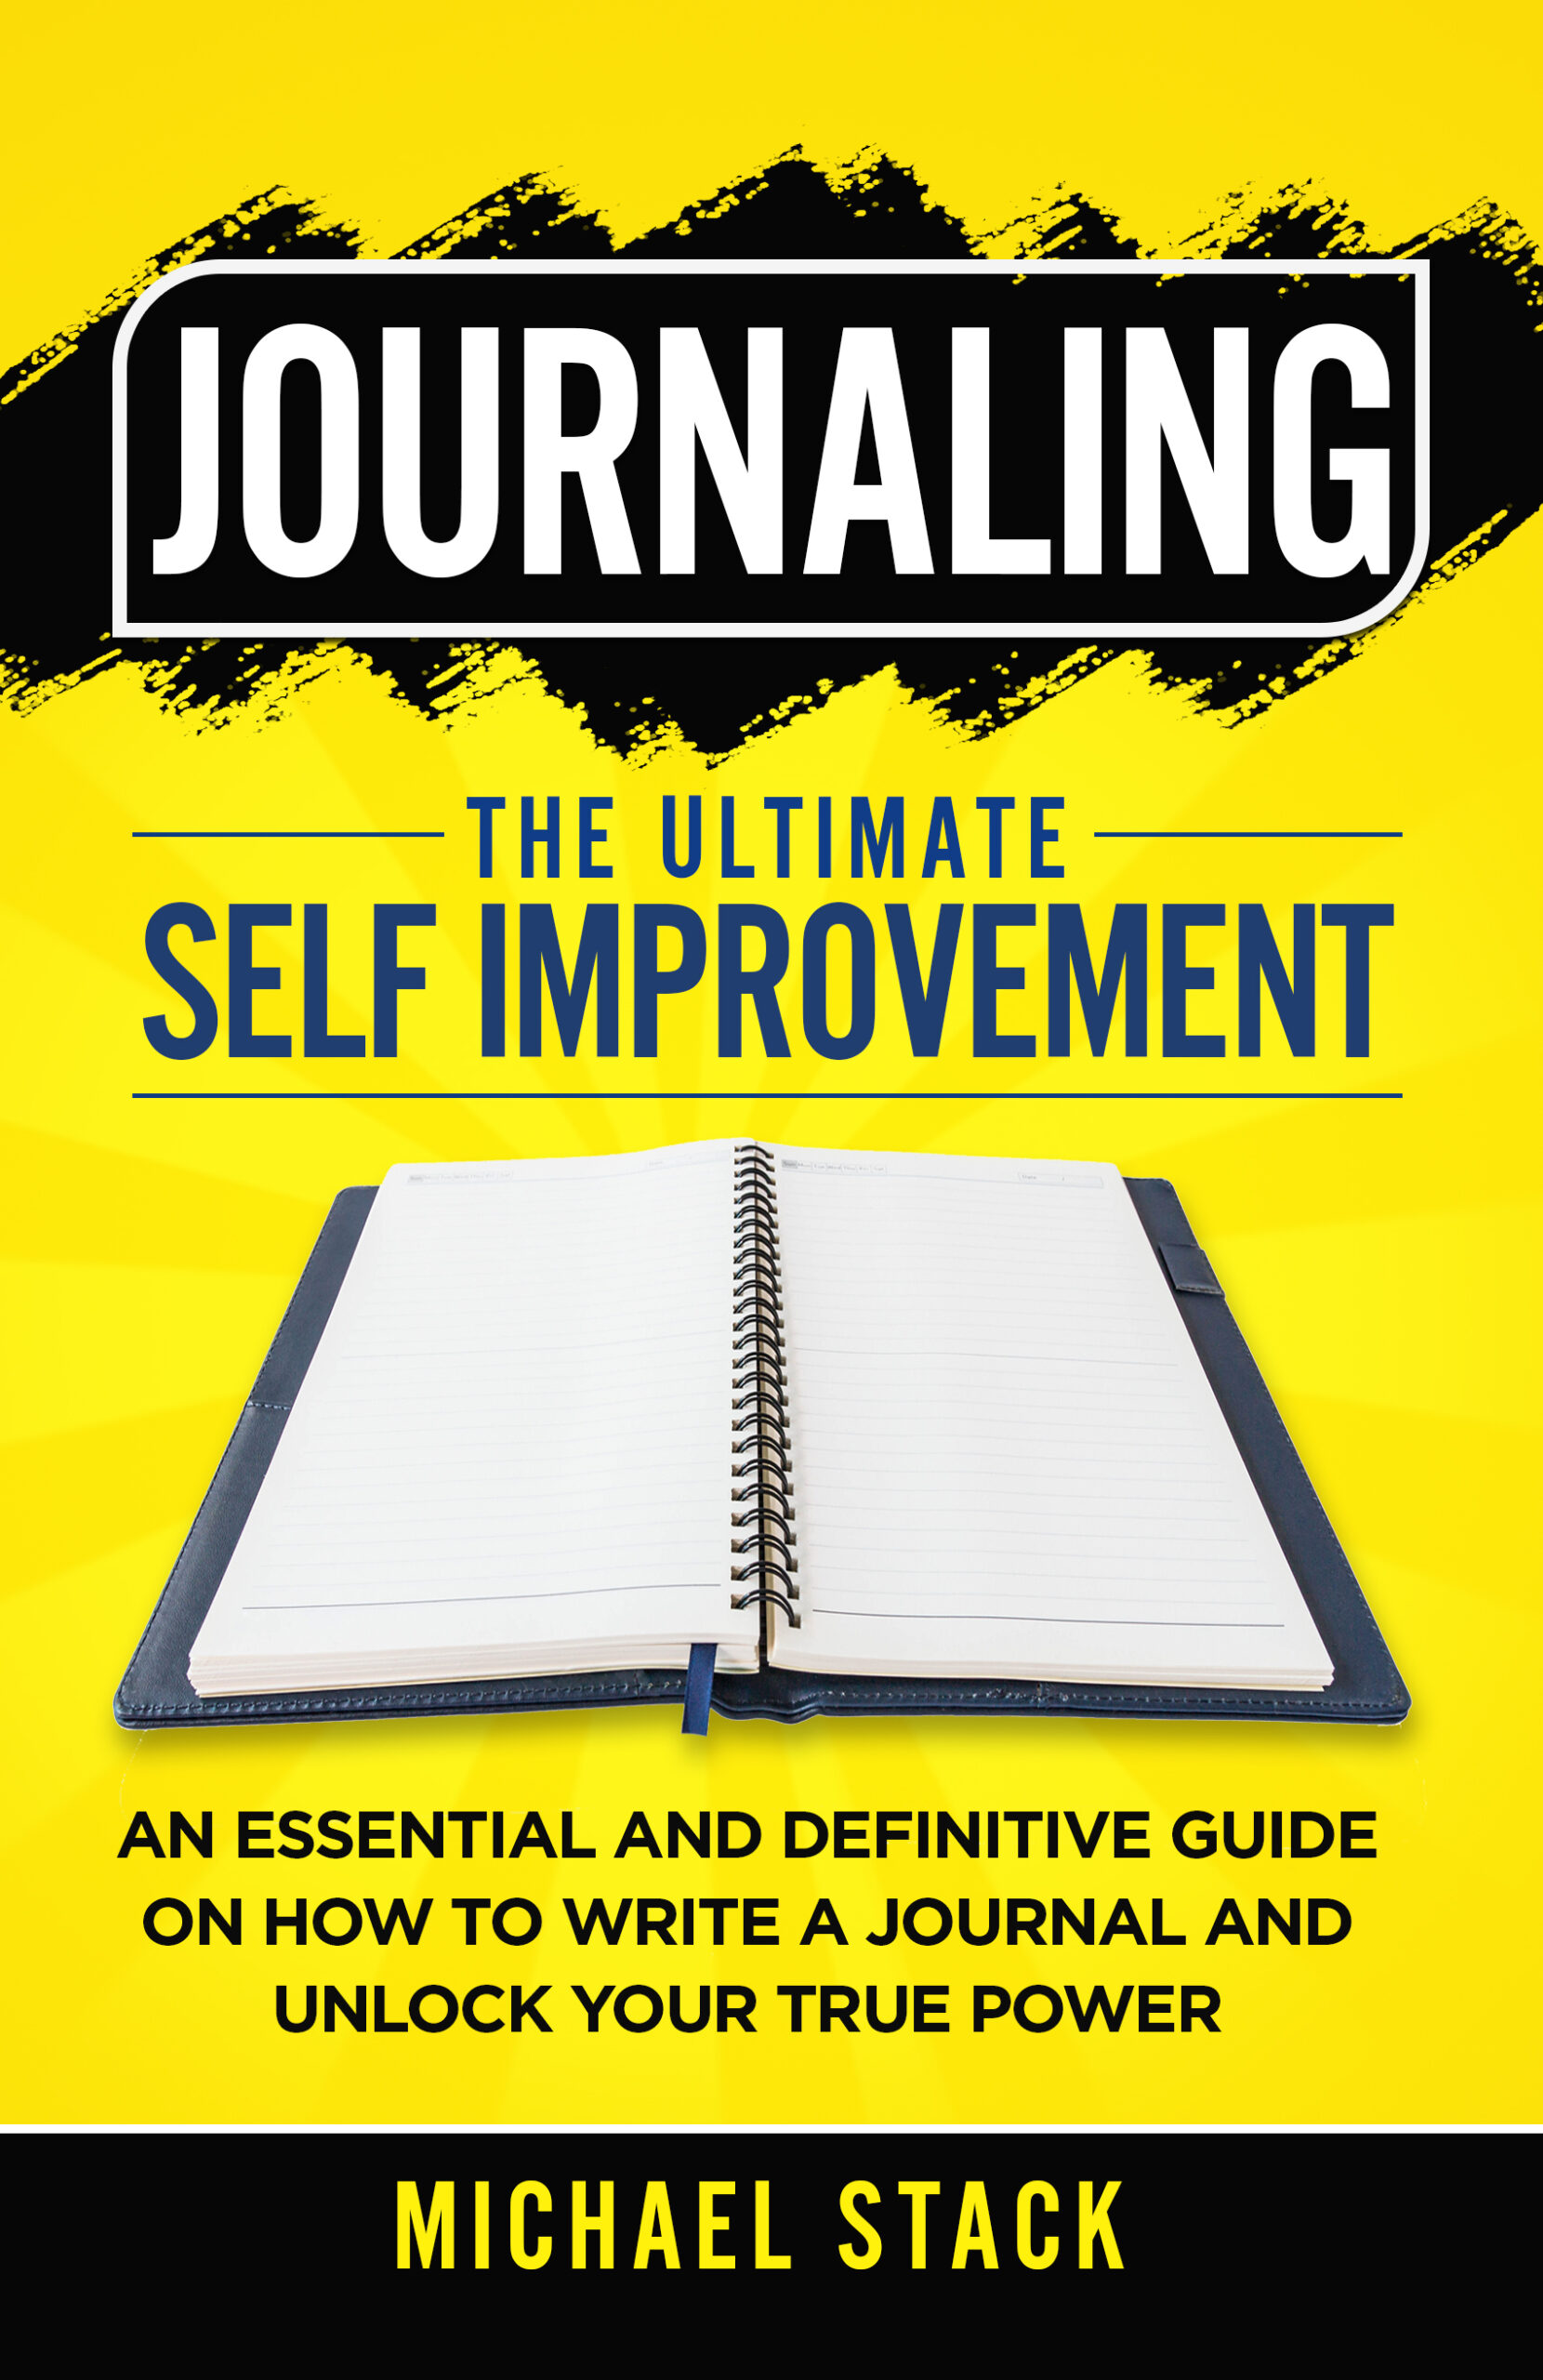 FREE: Journaling | The Ultimate Self Improvement: An Essential and Definitive Guide on How to Write a Journal and Unlock Your True Power by Michael Stack